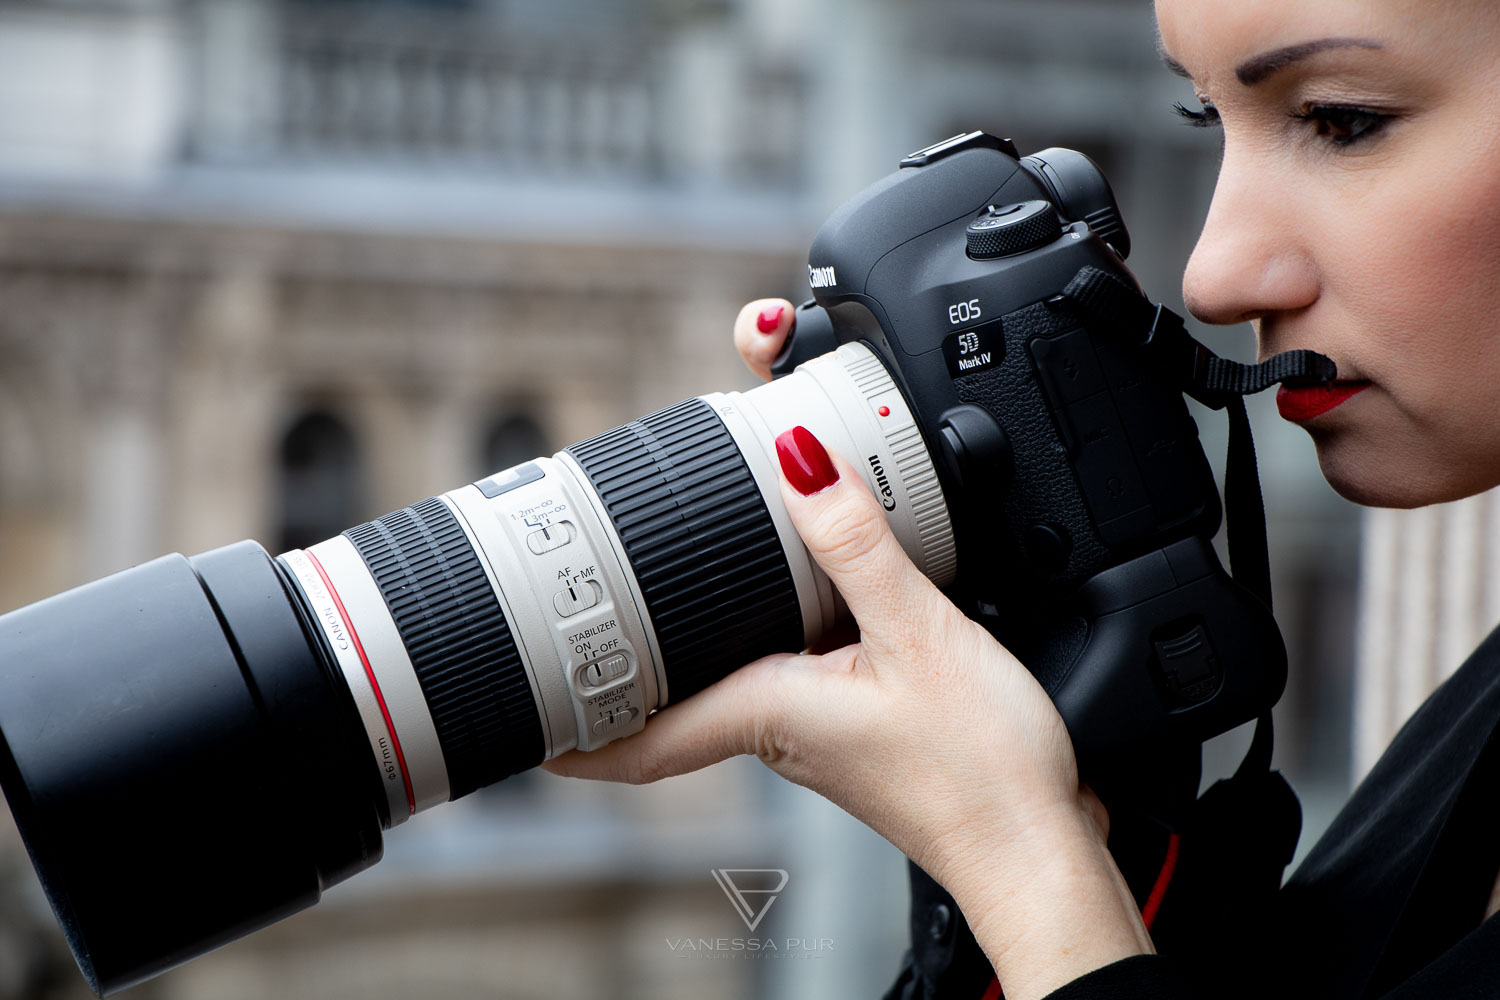 CANON 70-200mm f4 lens in review - The affordable L telephoto lens - Canon 70-200 f2.8 L IS II USM or f4.0 - Review and decision support - Is the Canon telephoto lens worth it - Evaluation and field reports